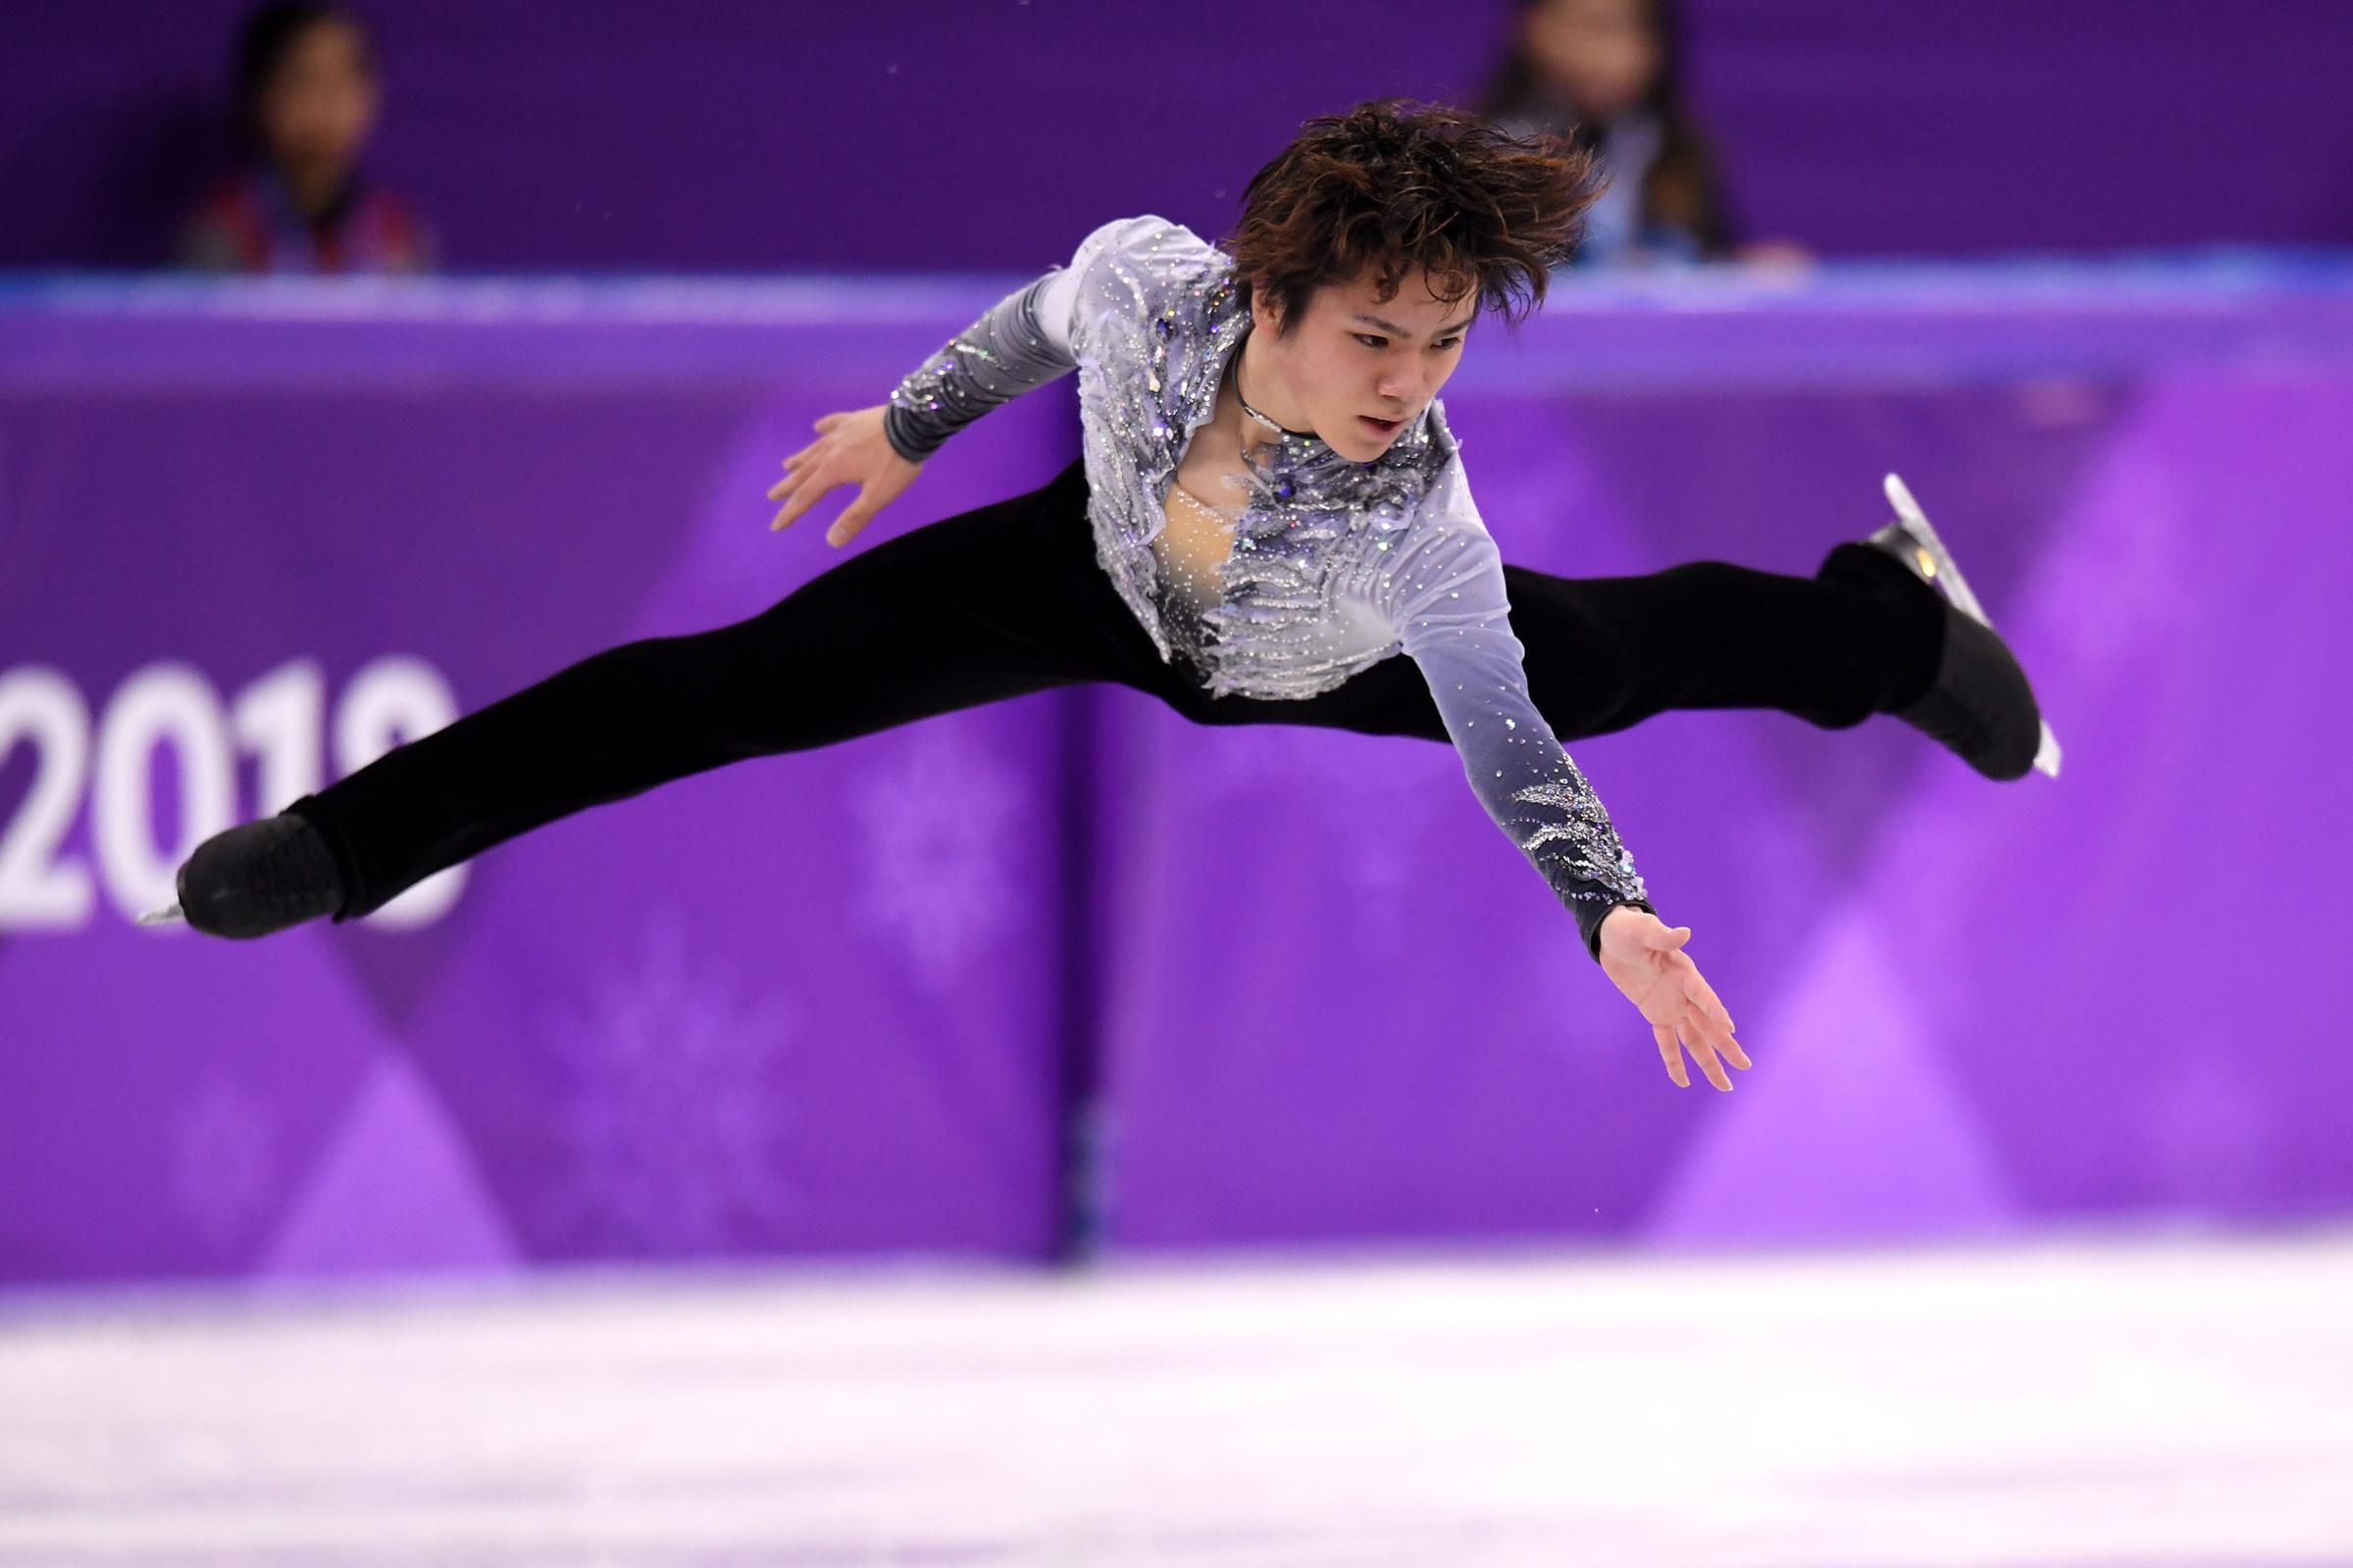 Shoma Uno of Japan competes during the Men's Single Skating Short Program at Gangneung Ice Arena on Feb. 16, 2018 in Gangneung, South Korea.